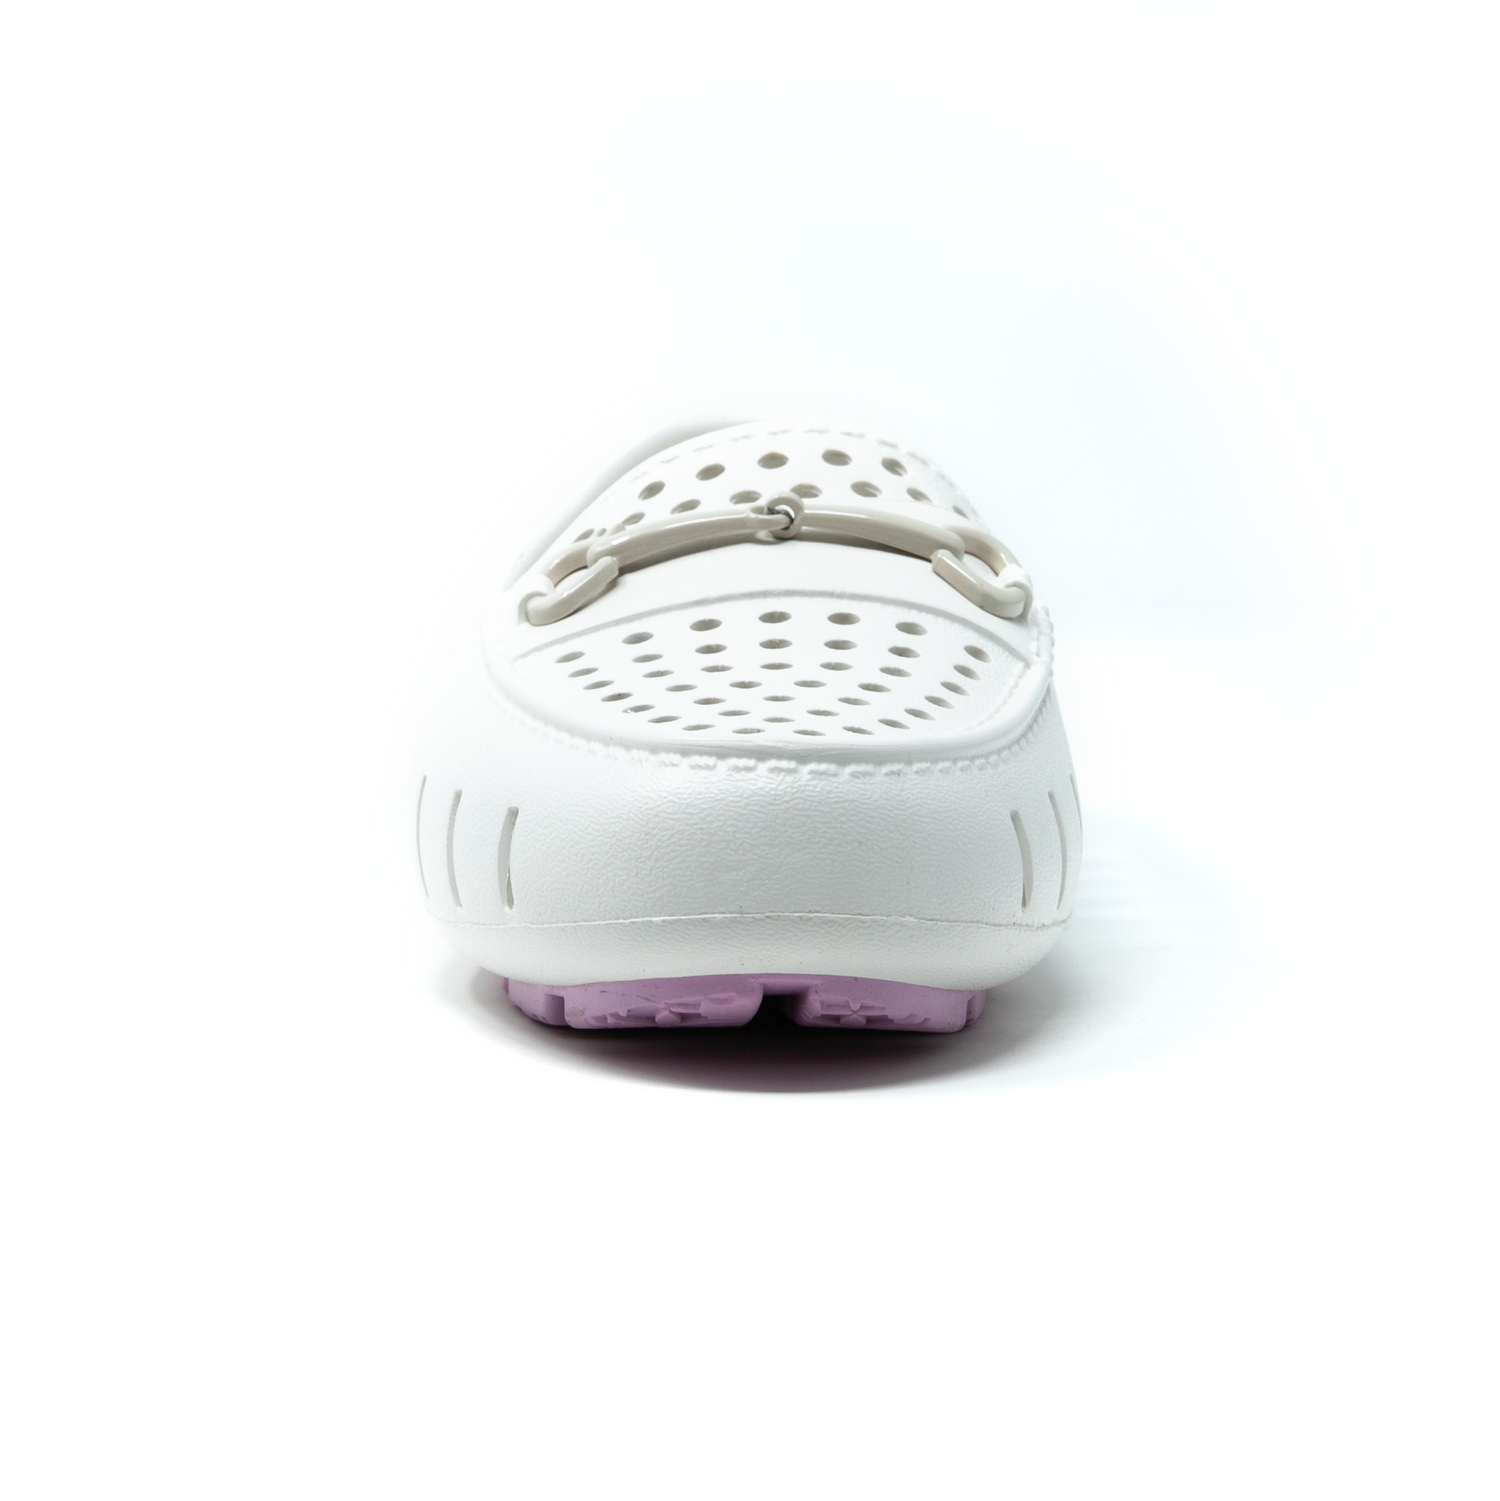 COCONUT/LAVENDER PINK - WOMENS